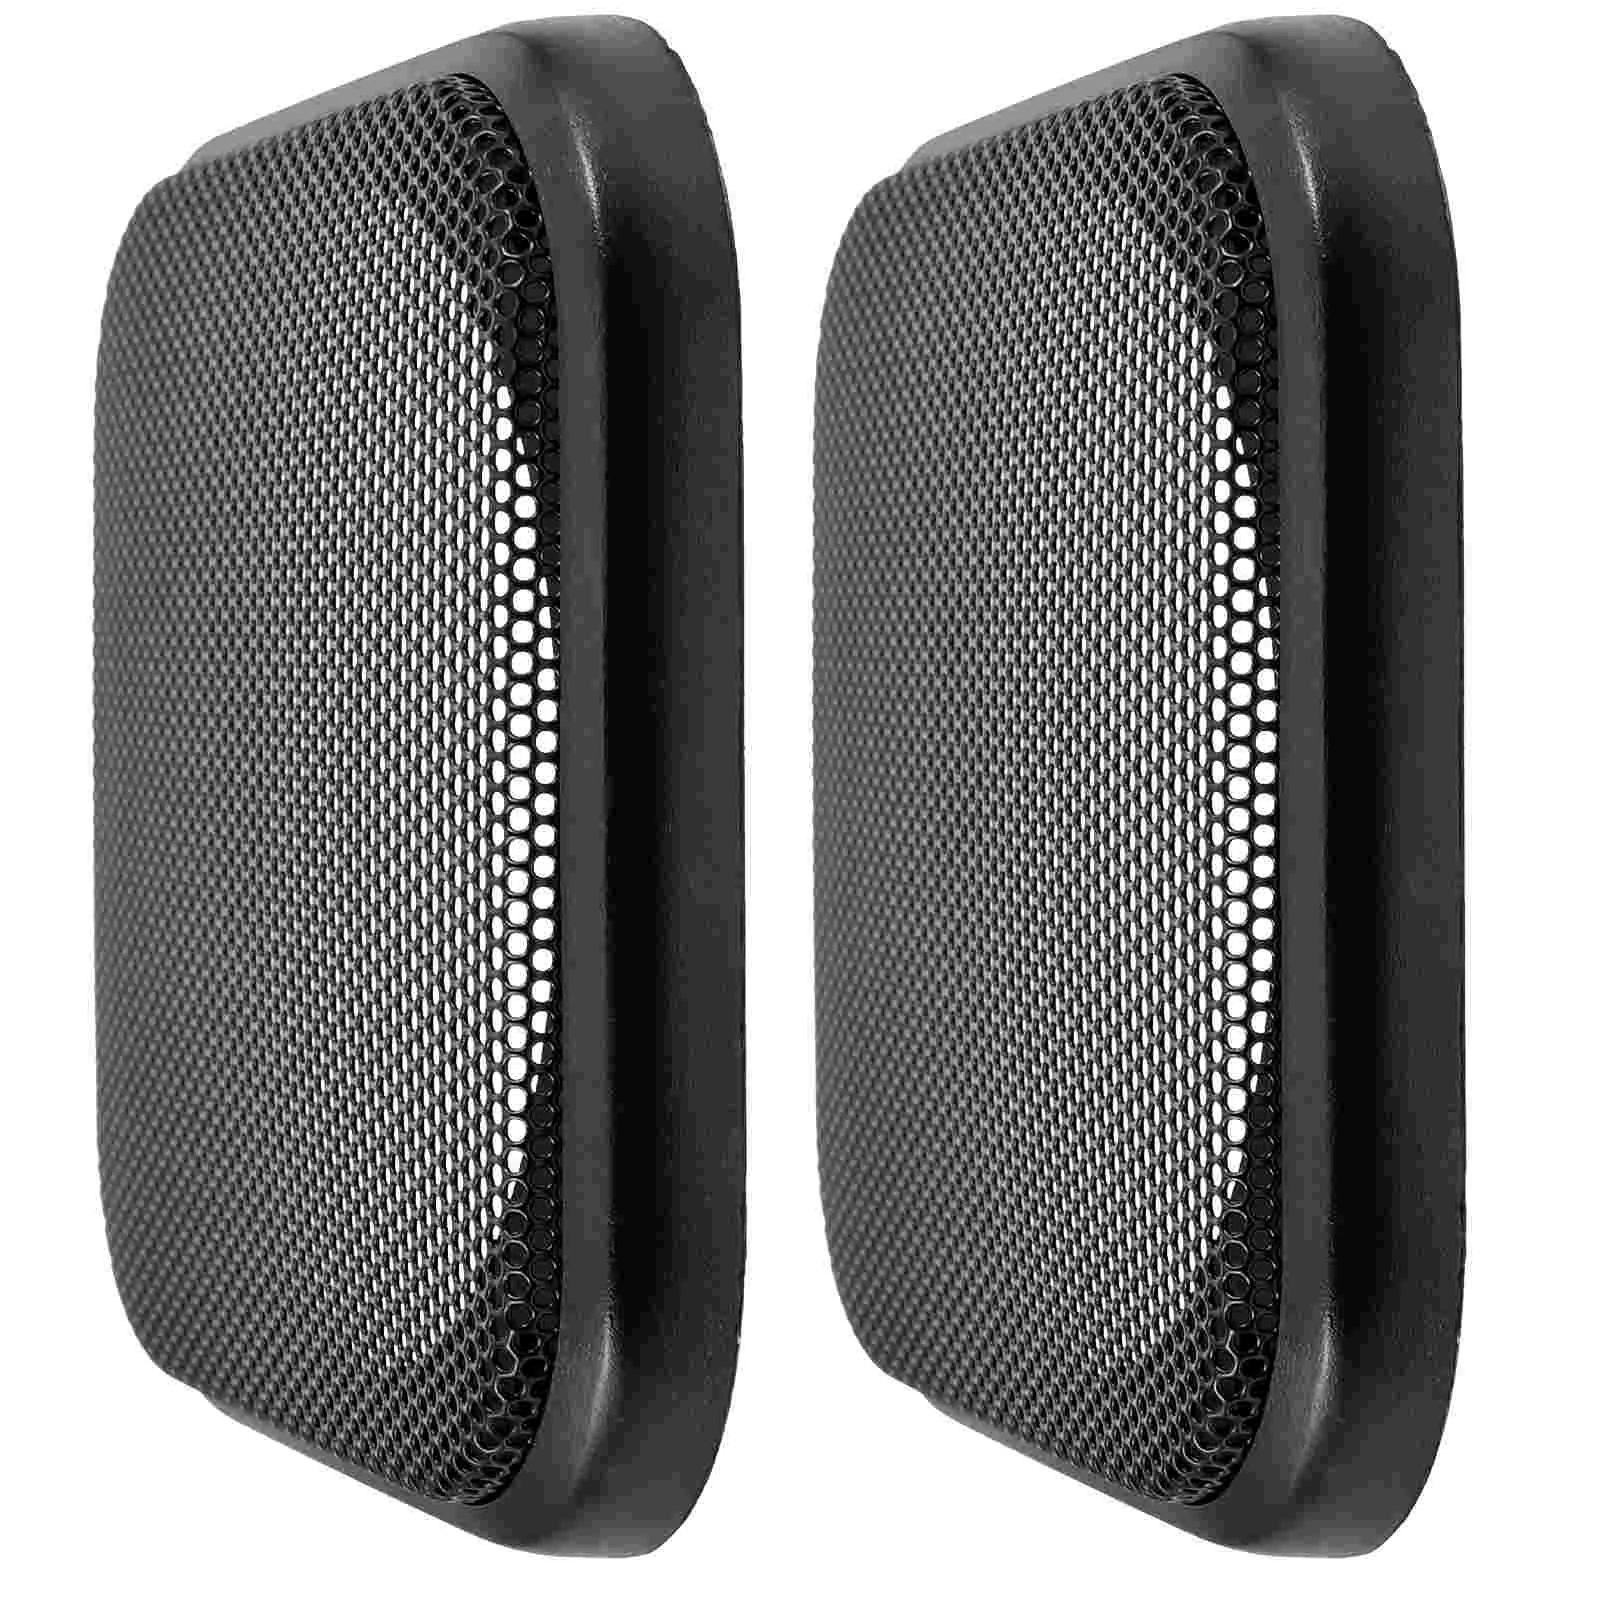 

2 Pcs Speaker Grille Speakers Subwoofer Car Grills Mesh Covers for Iron Accessory